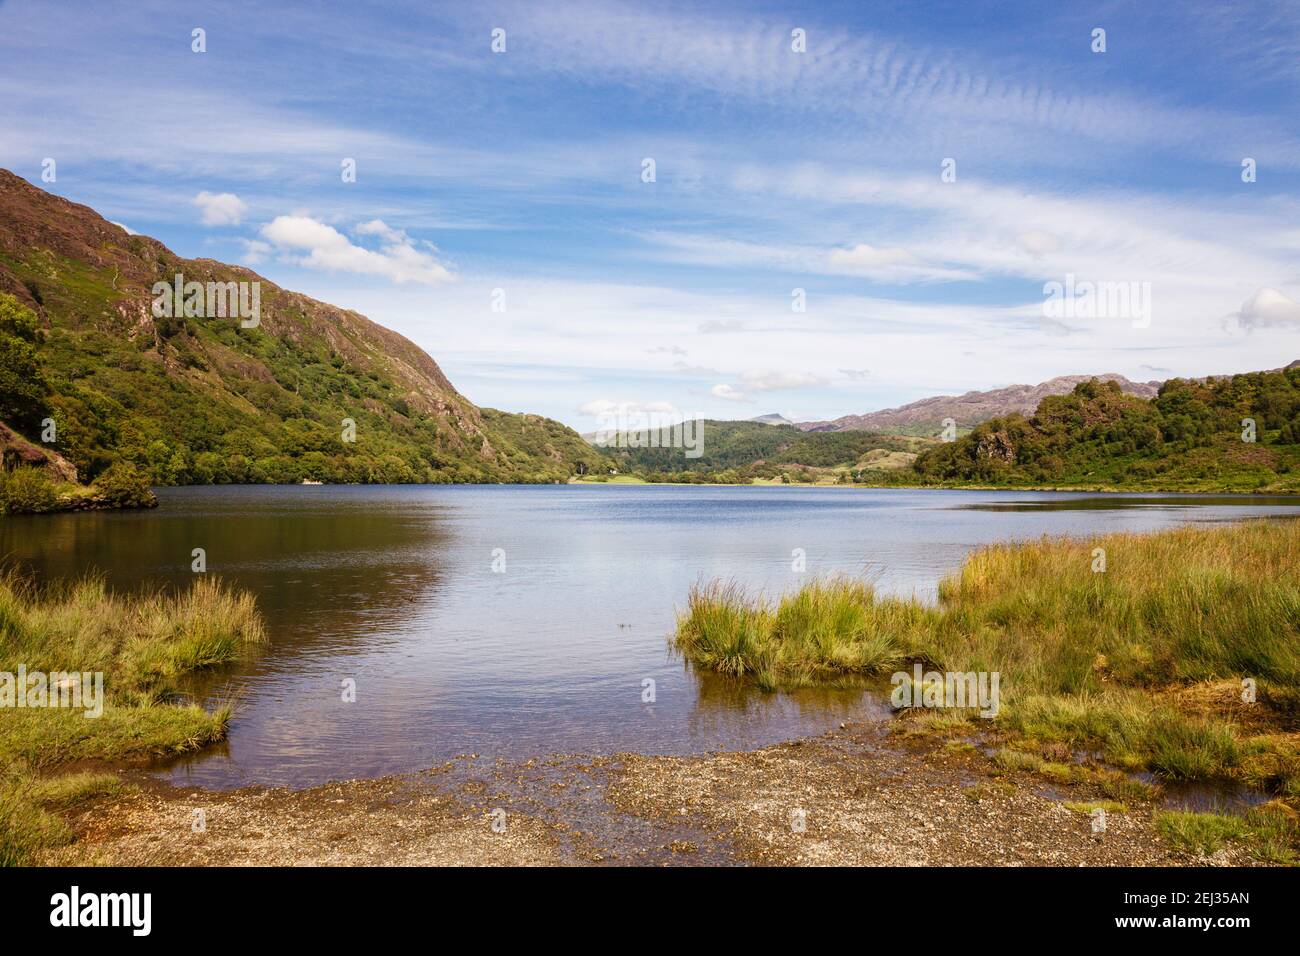 View of scenic Llyn Dinas lake in Snowdonia National Park mountains in summer. Bethania Gwynedd North Wales UK Britain Stock Photo